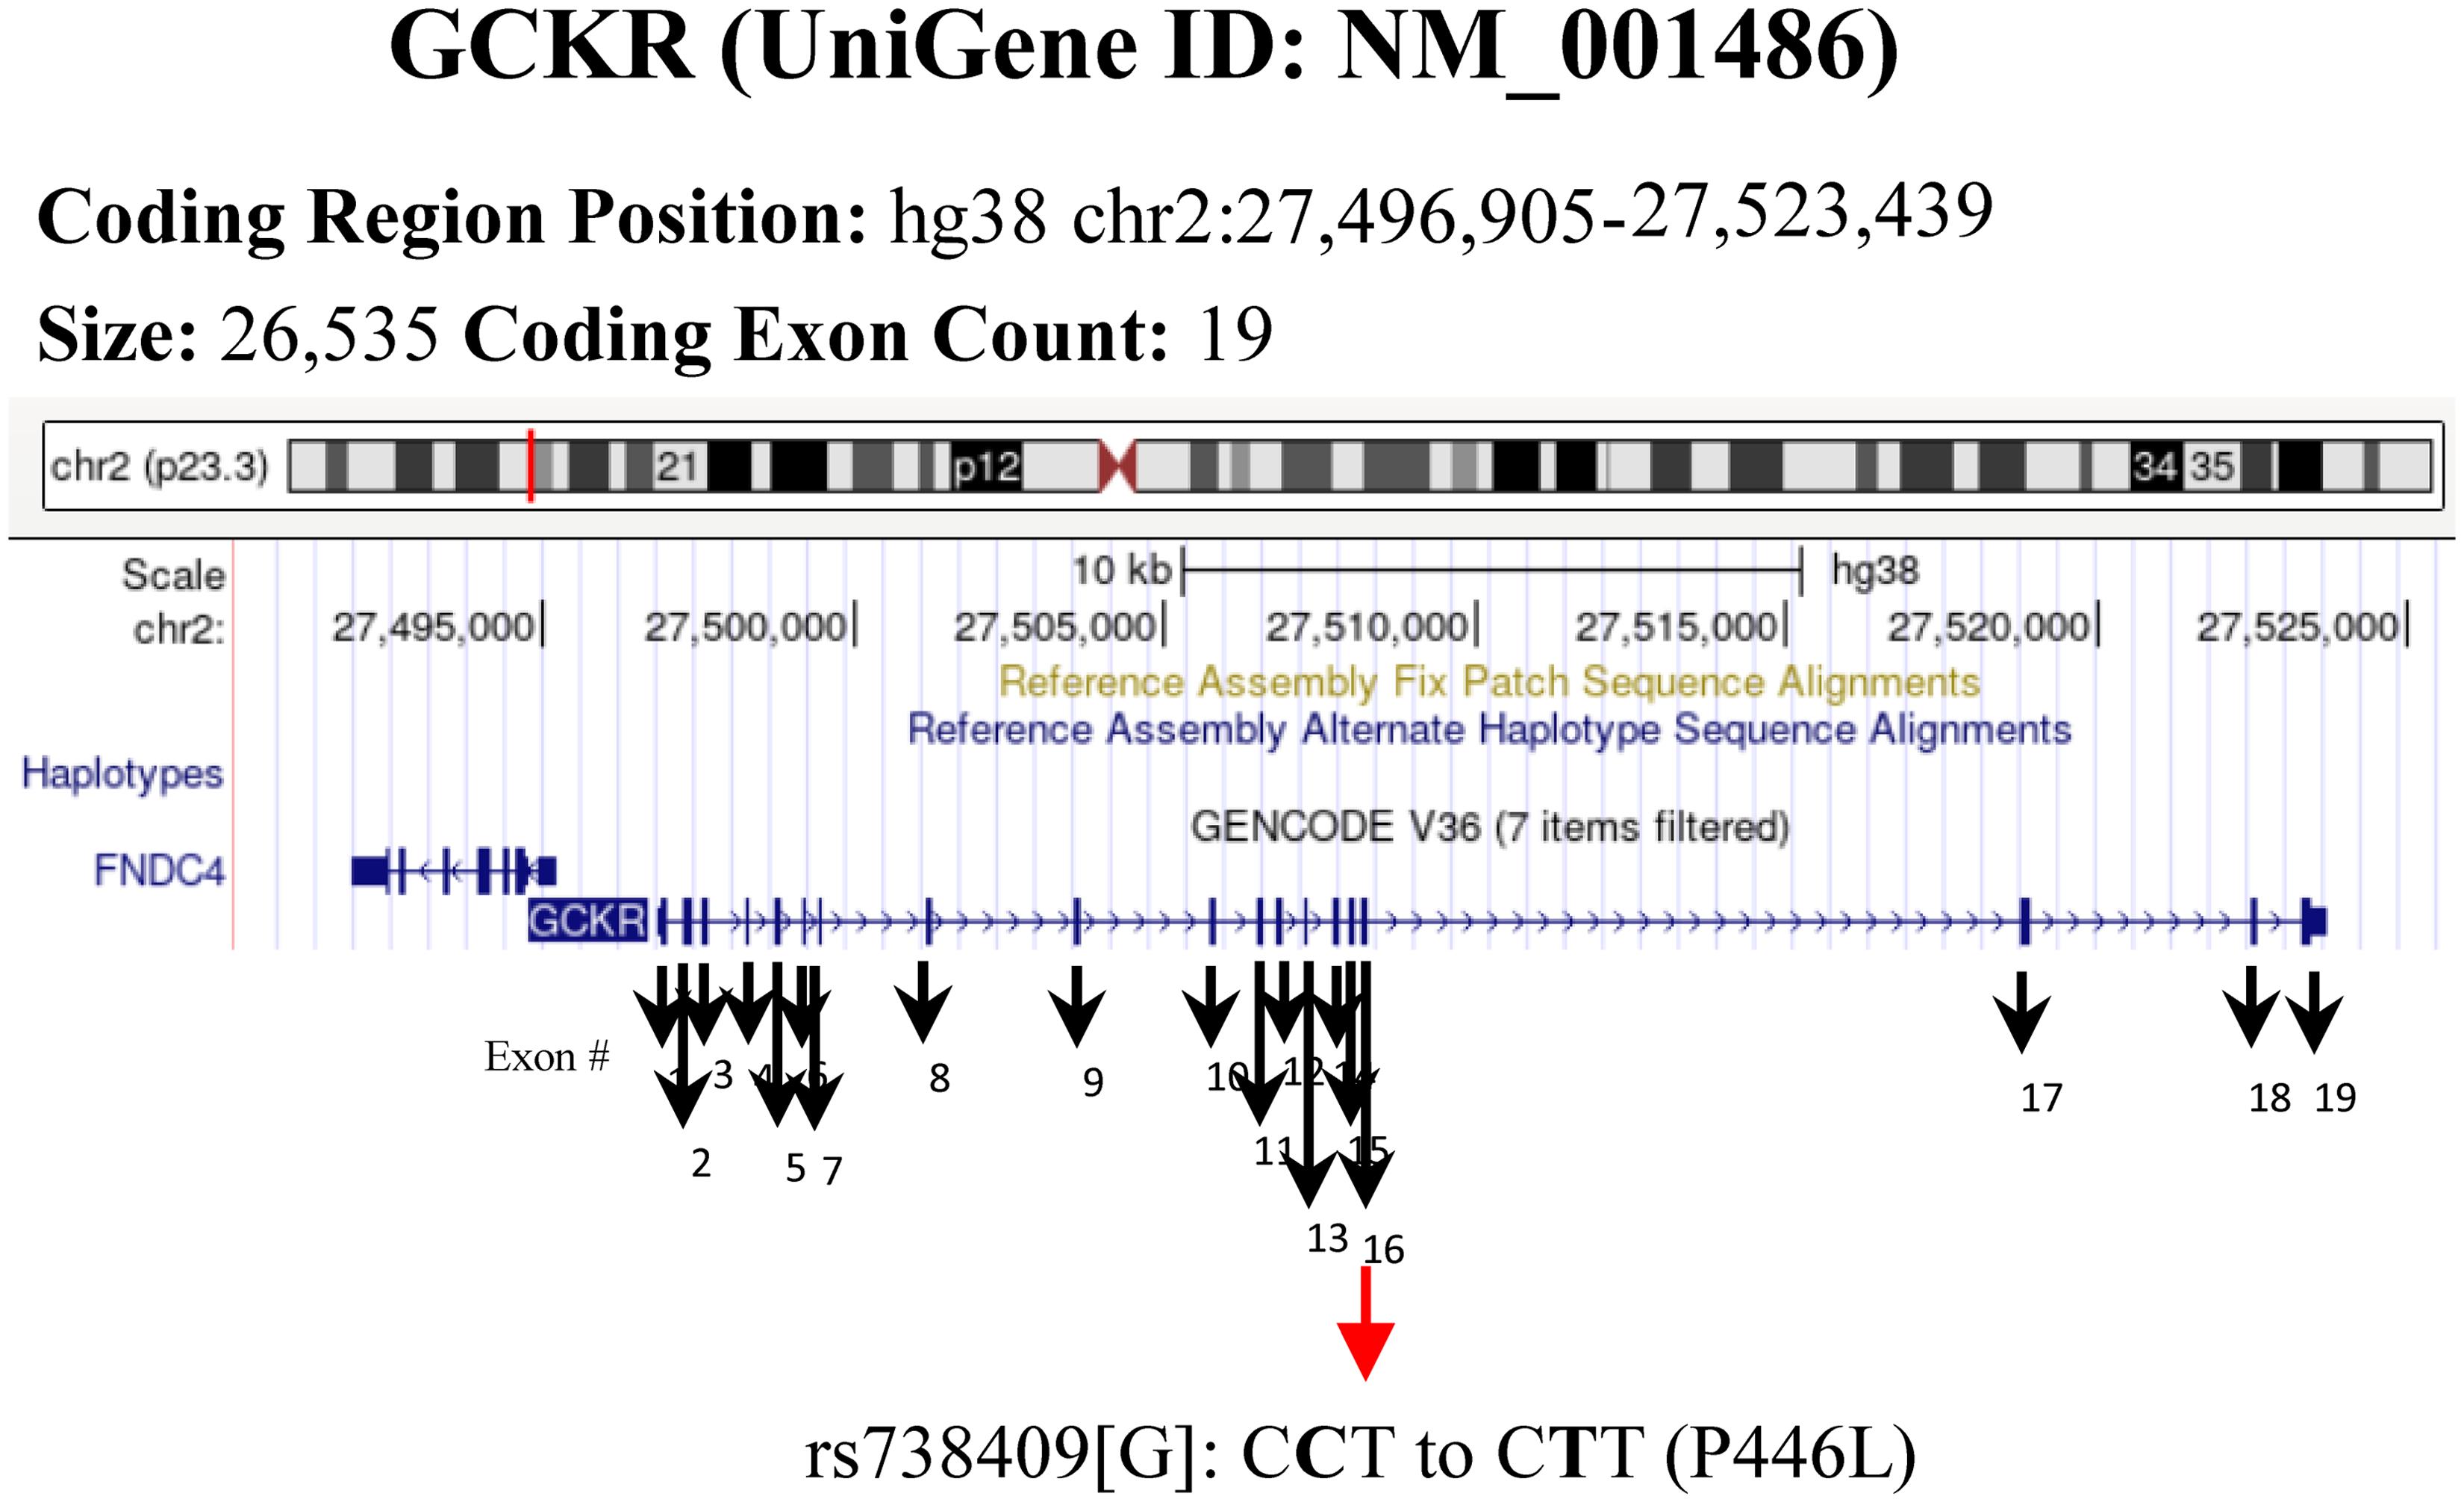 GCKR gene locus showing the rs738409 polymorphism.